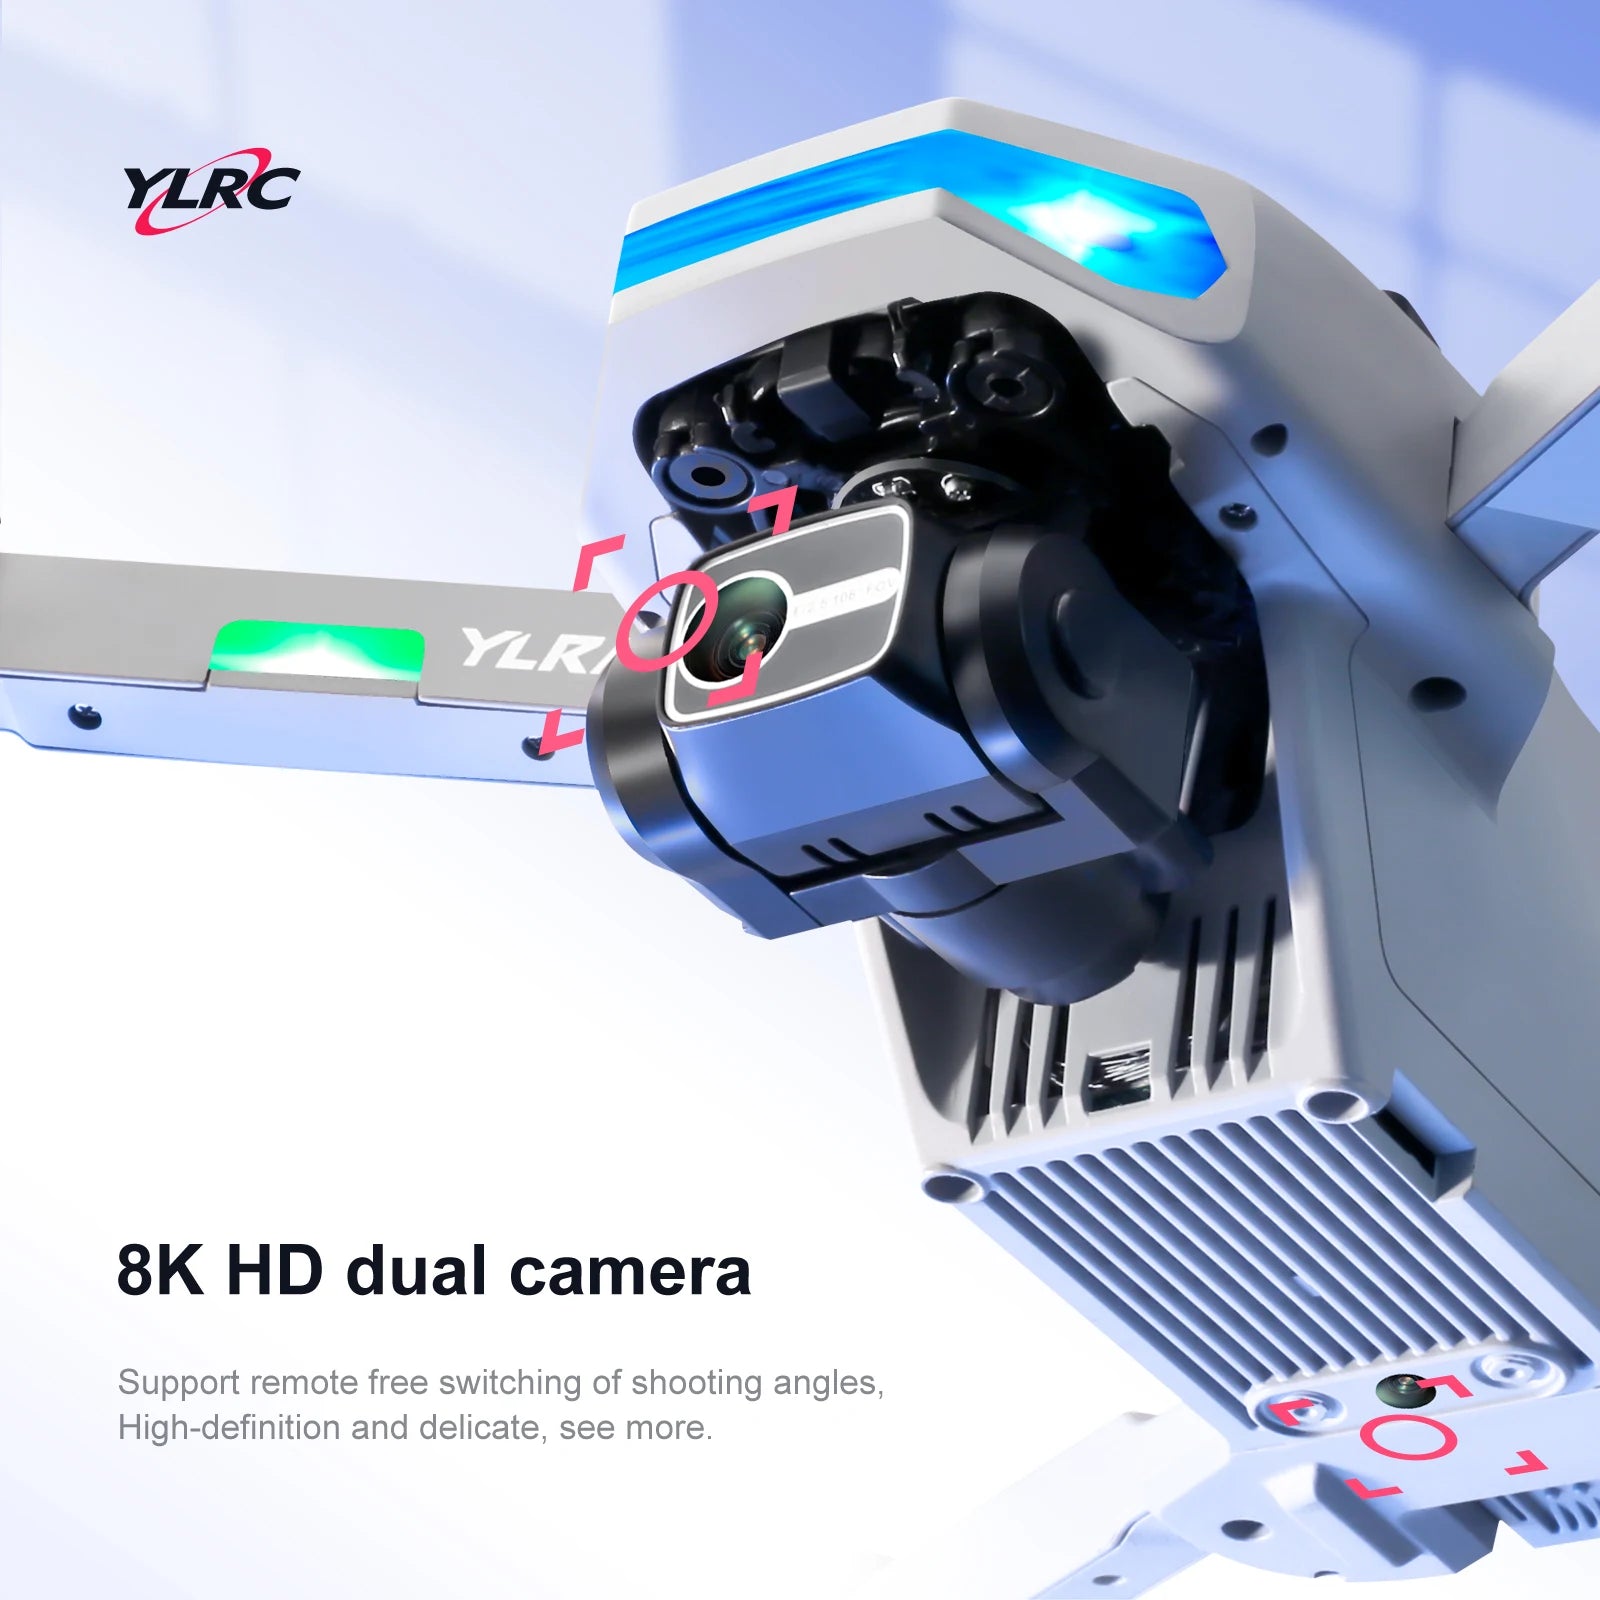 S135 Drone, YLRC YKA 8K HD dual camera Support remote free switching of shooting angles